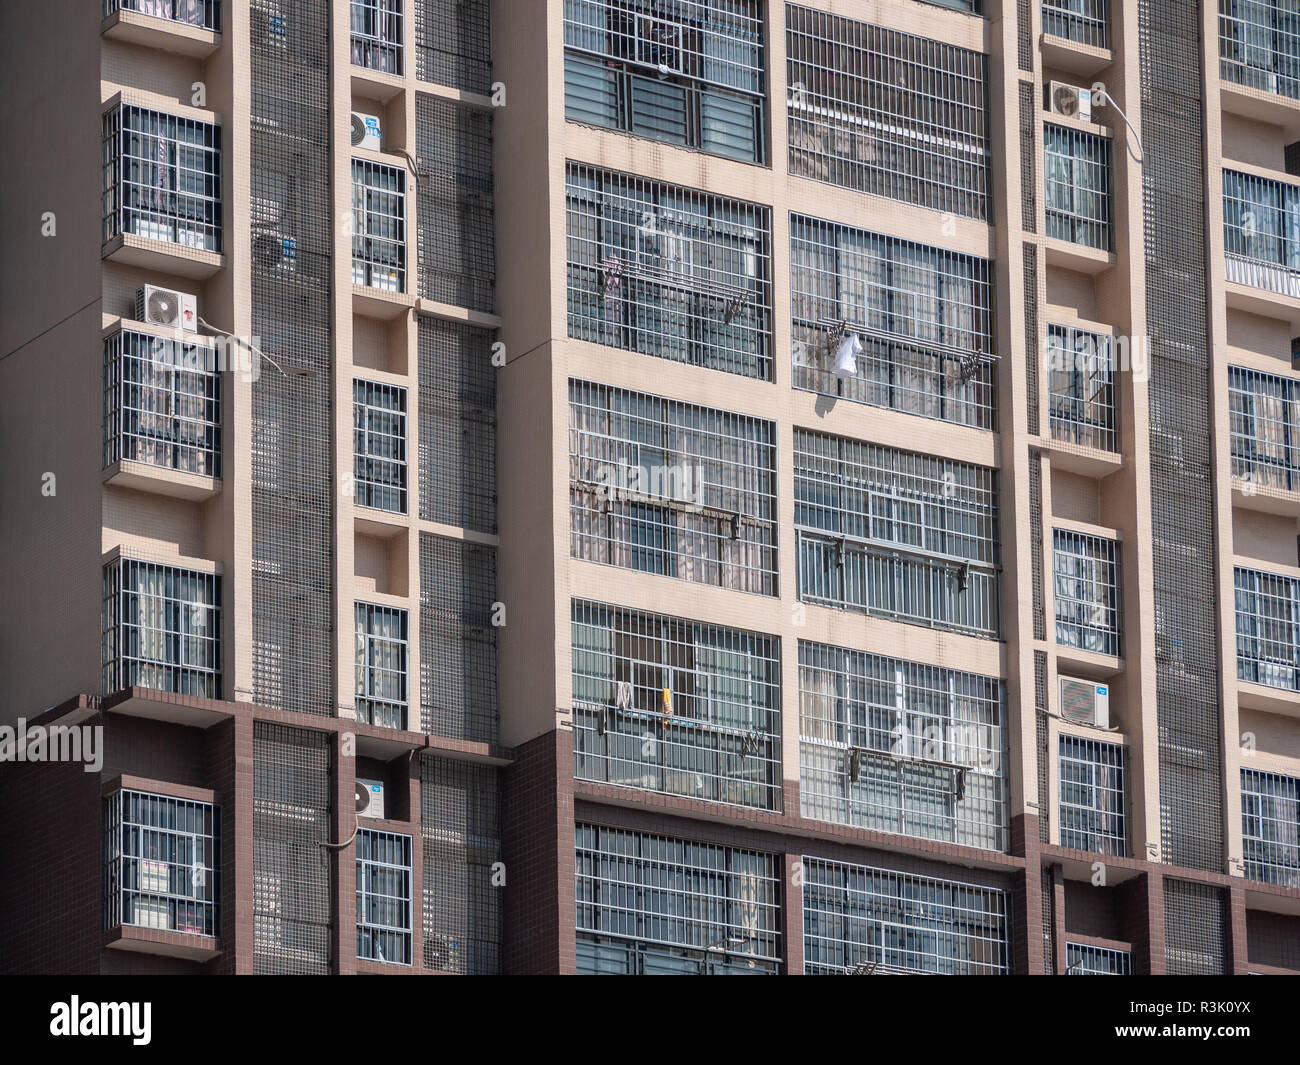 Facade of high-rise apartment building. Exterior of high-density residential building with most windows secured with burglar mesh. Liuzhou, China. Stock Photo